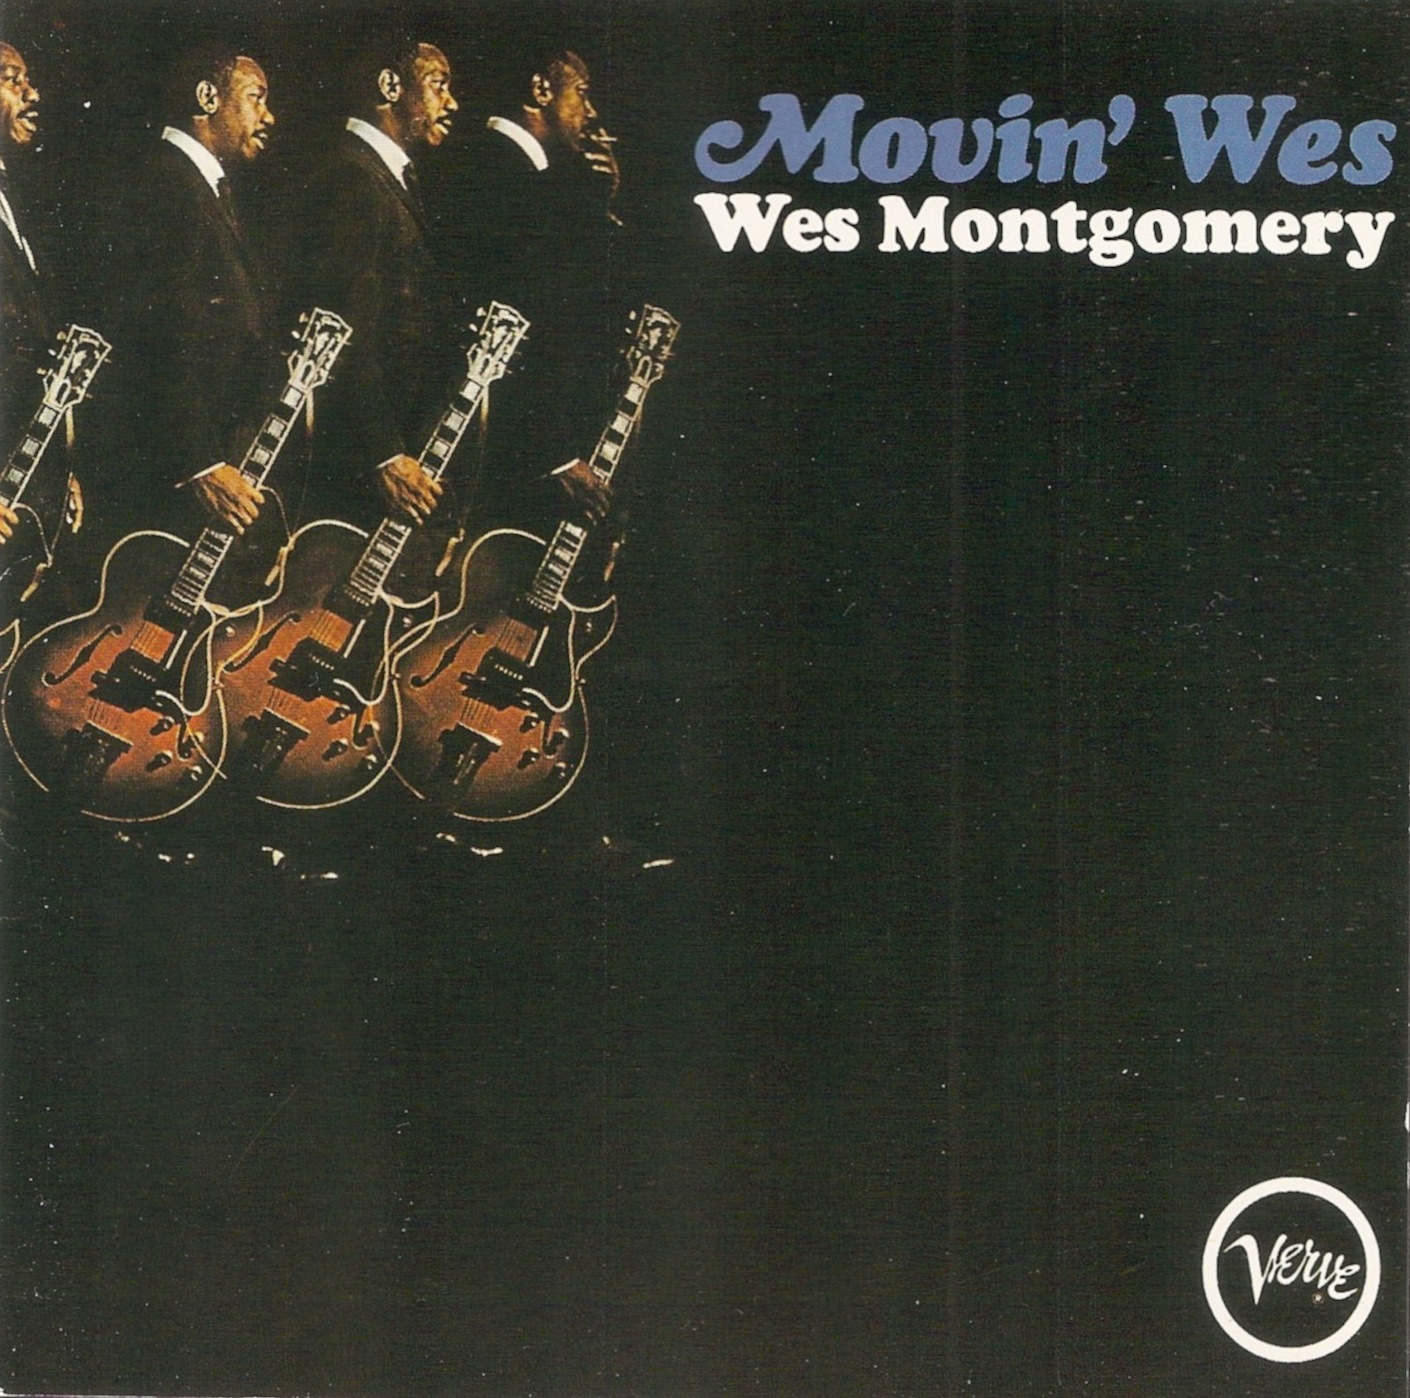 The First Pressing CD Collection: Wes Montgomery - Movin' Wes